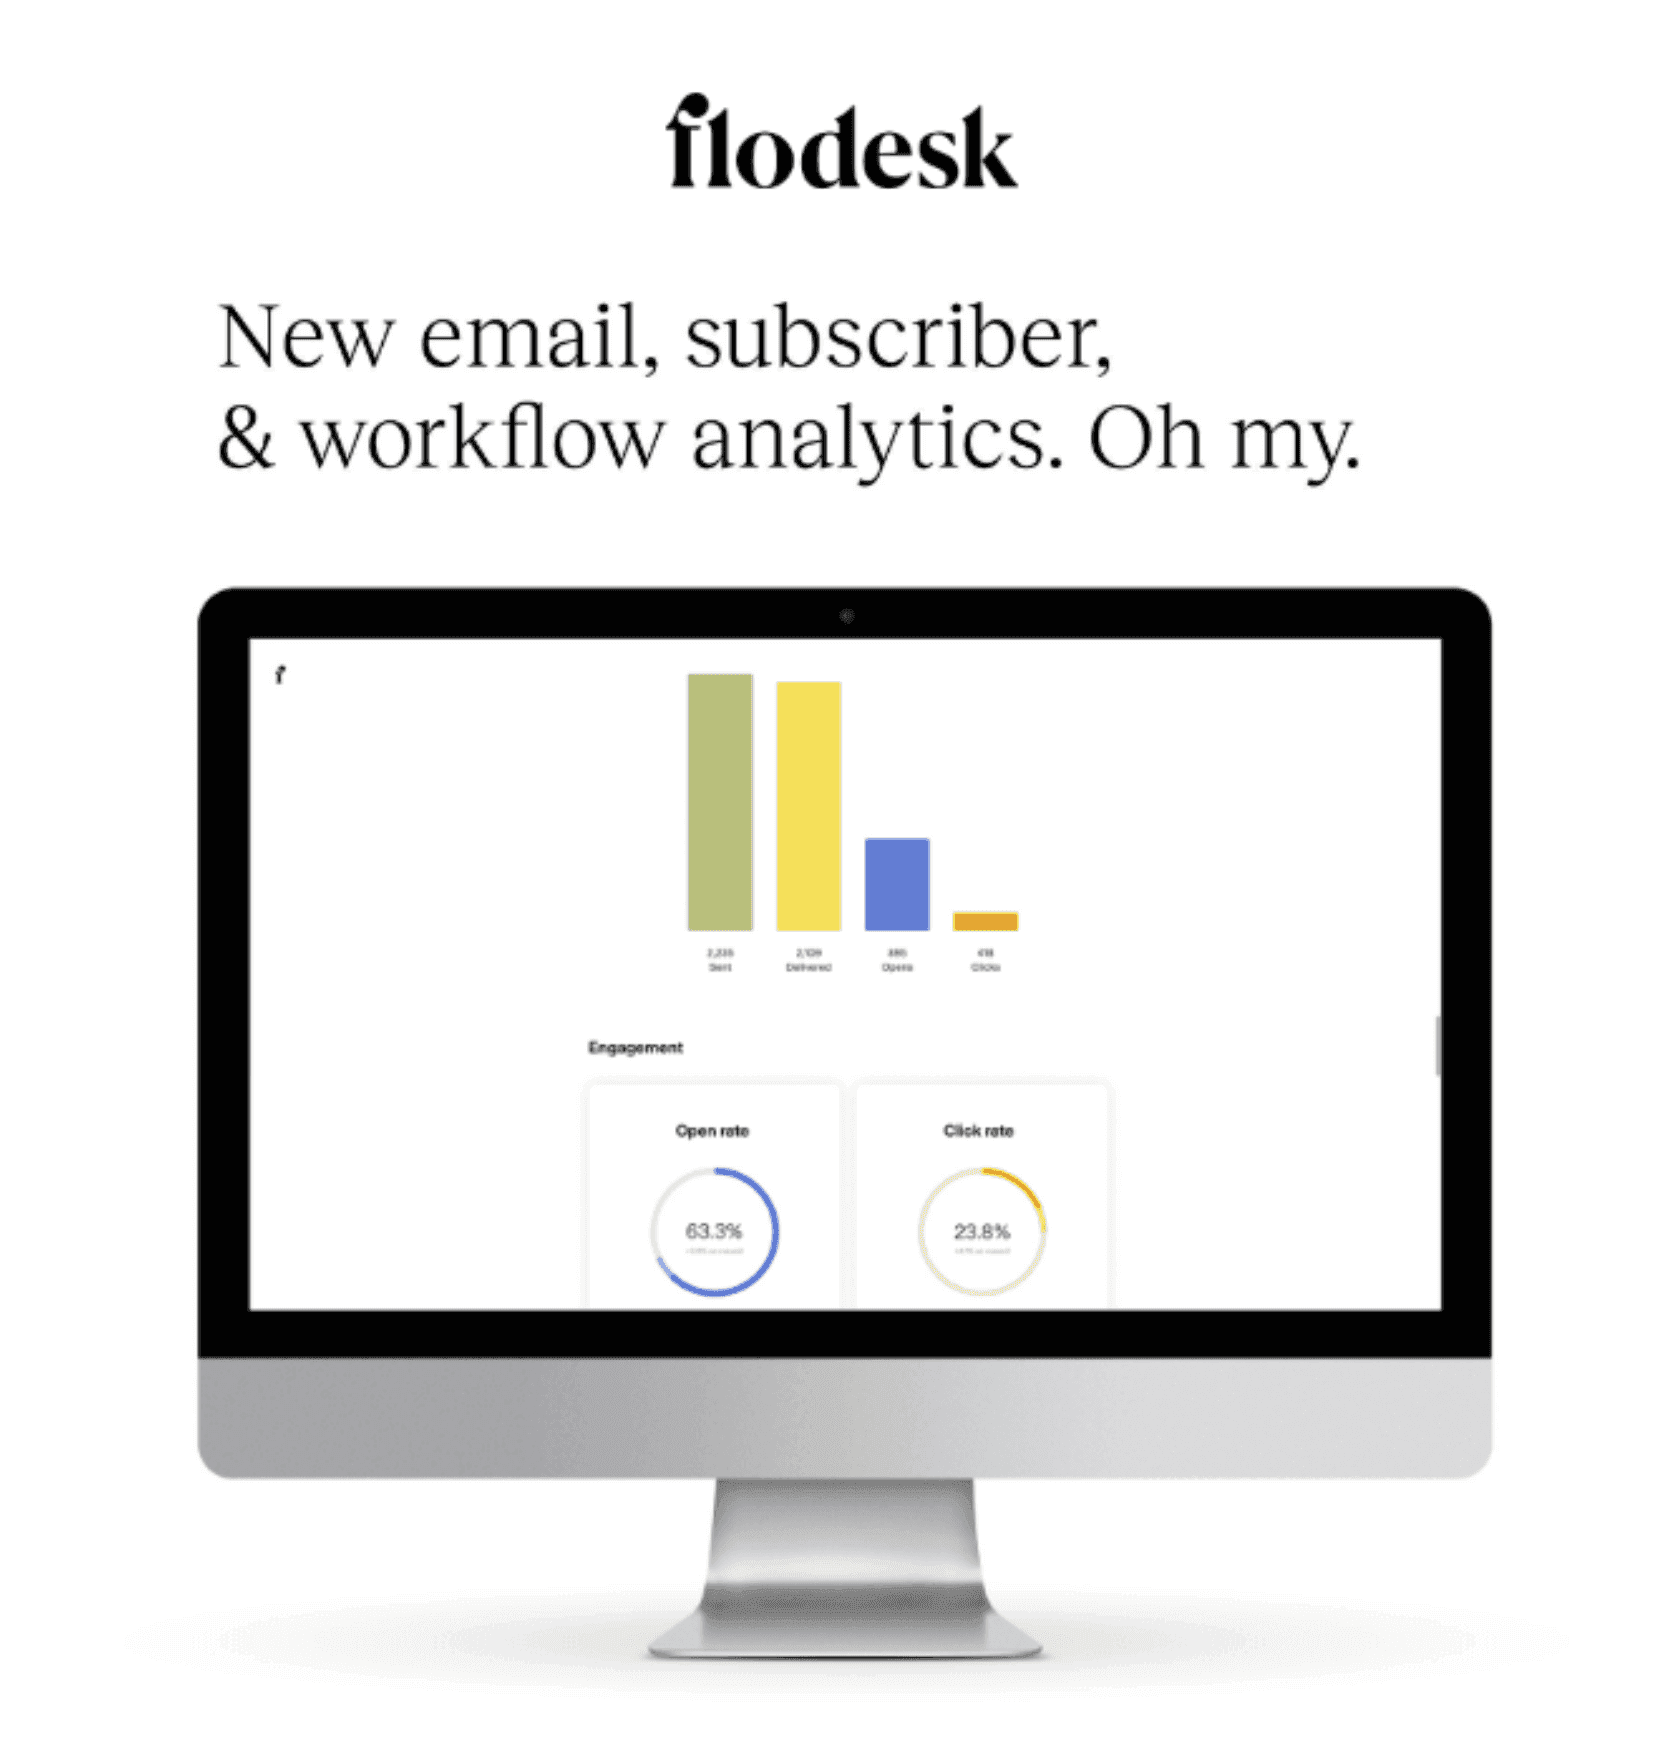 Flodesk marketing email - New email, subscriber, & workflow analytics. Oh My.